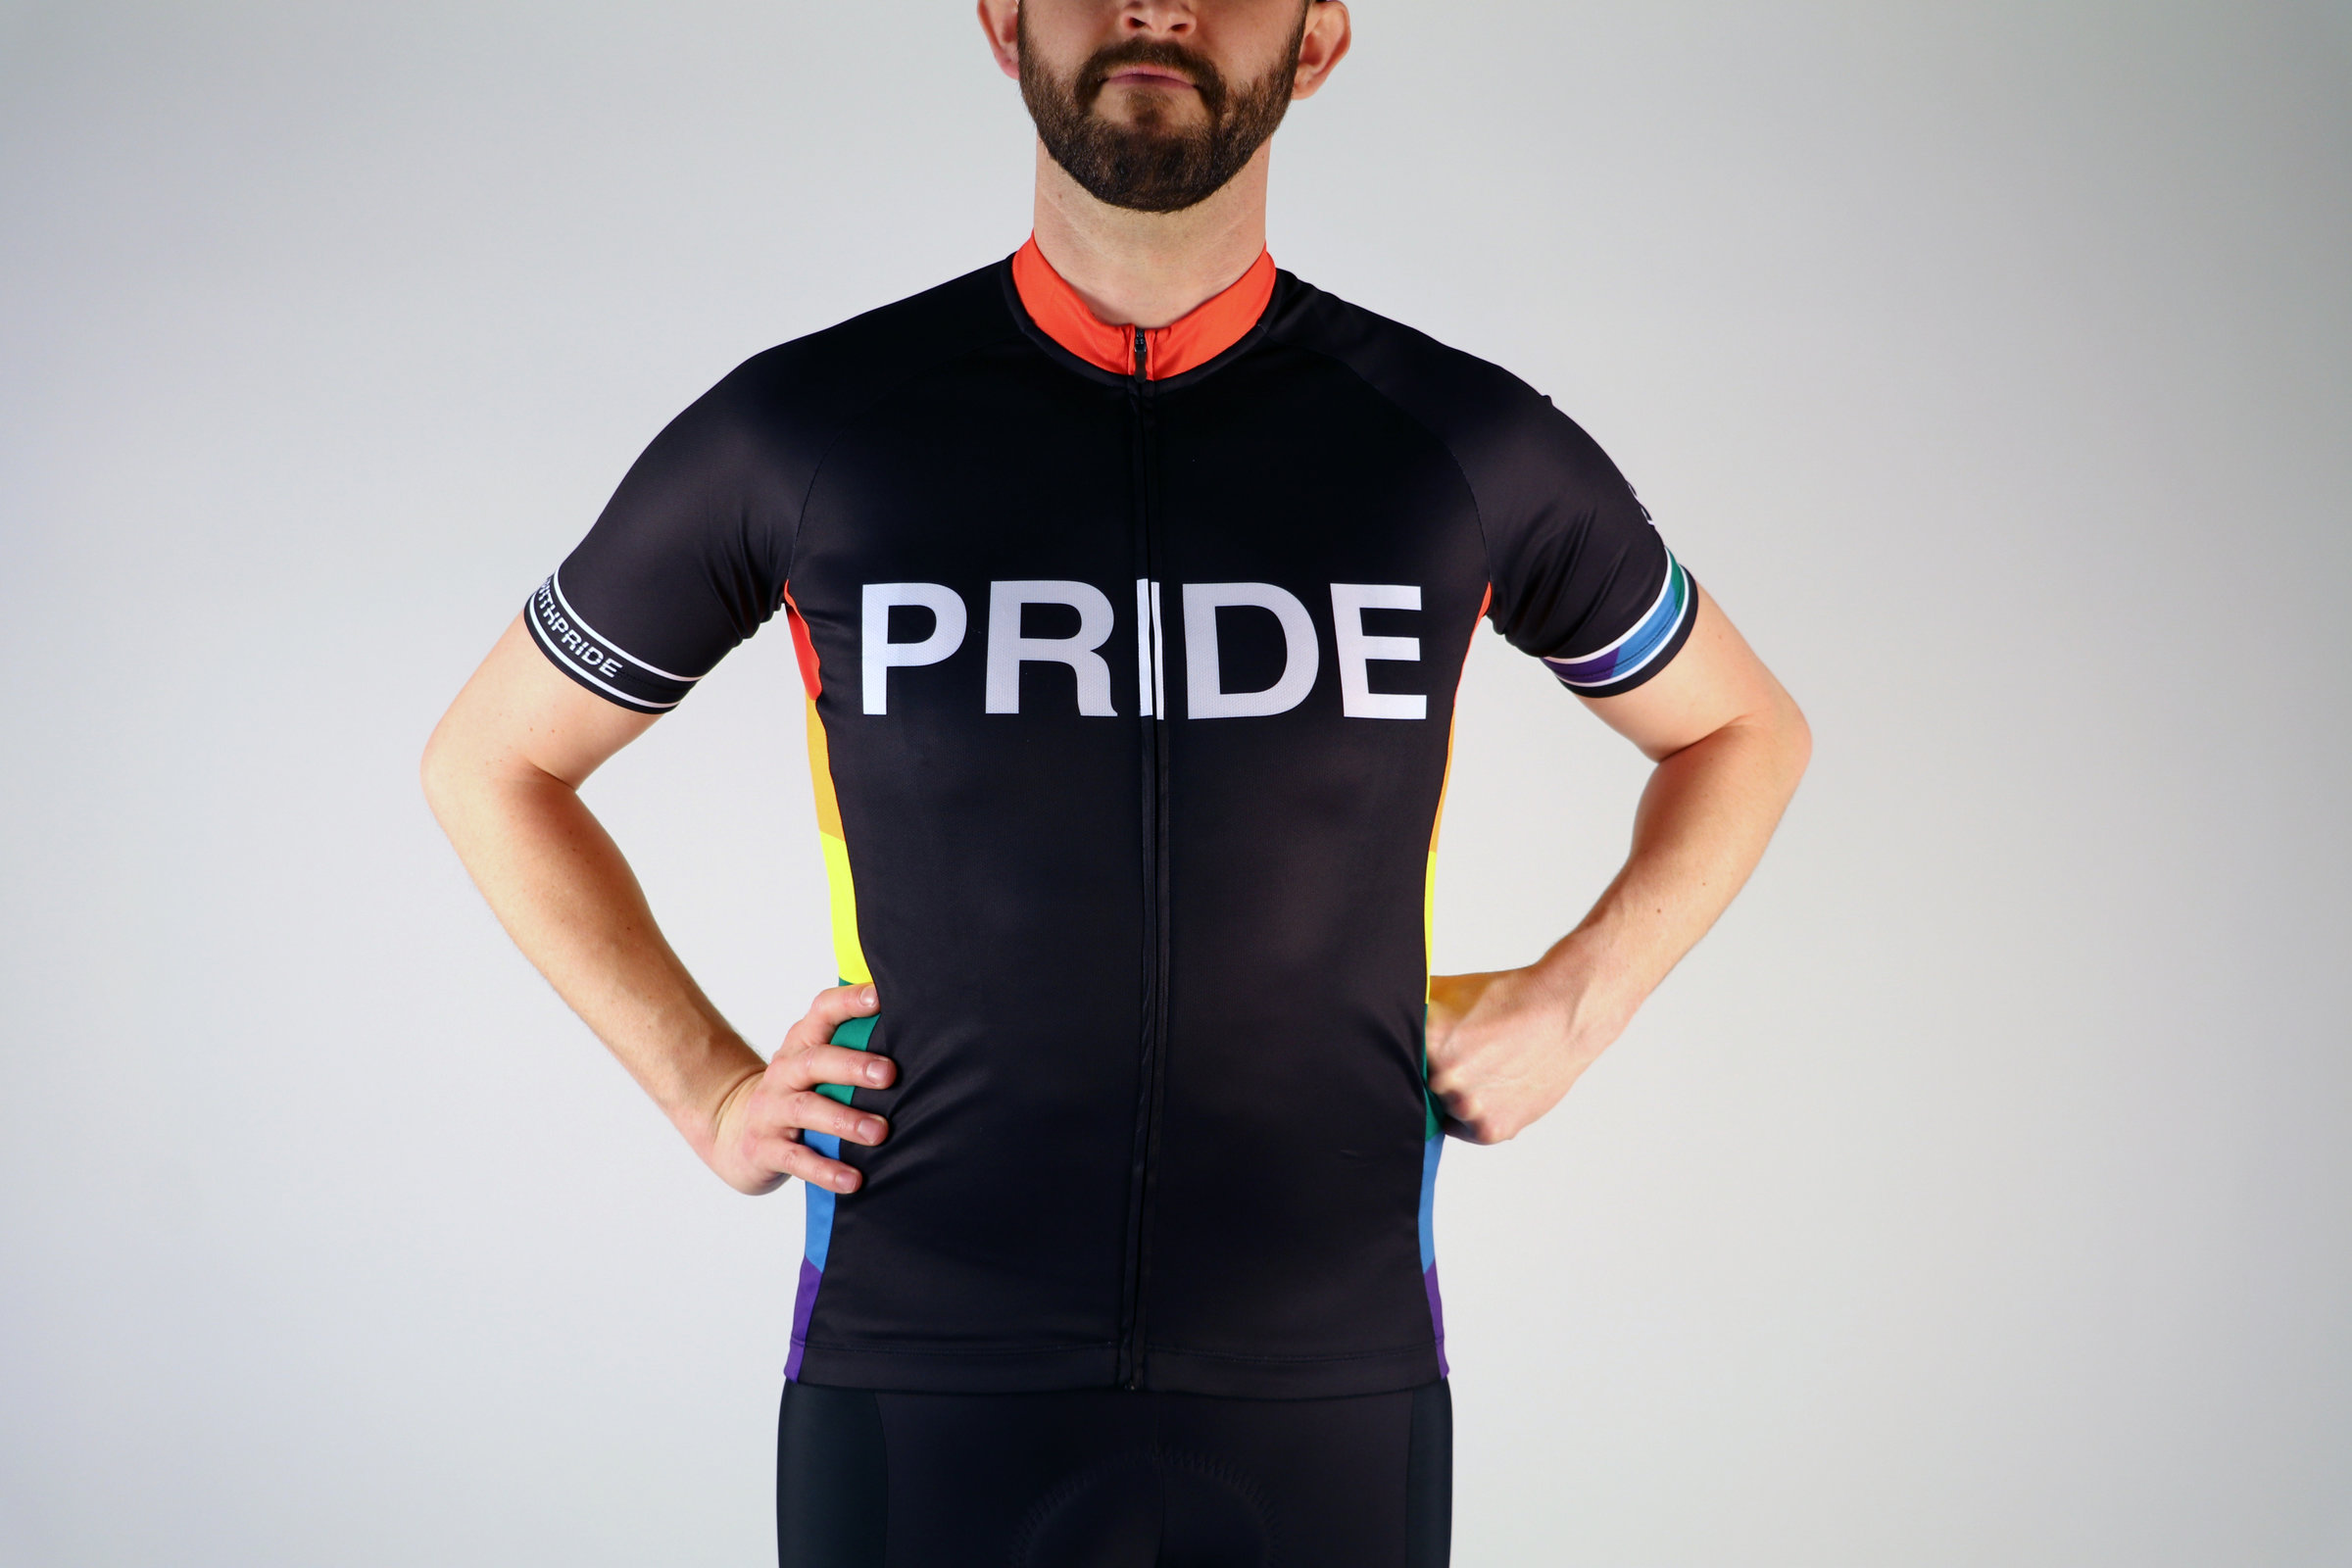 Ride with Pride Jersey